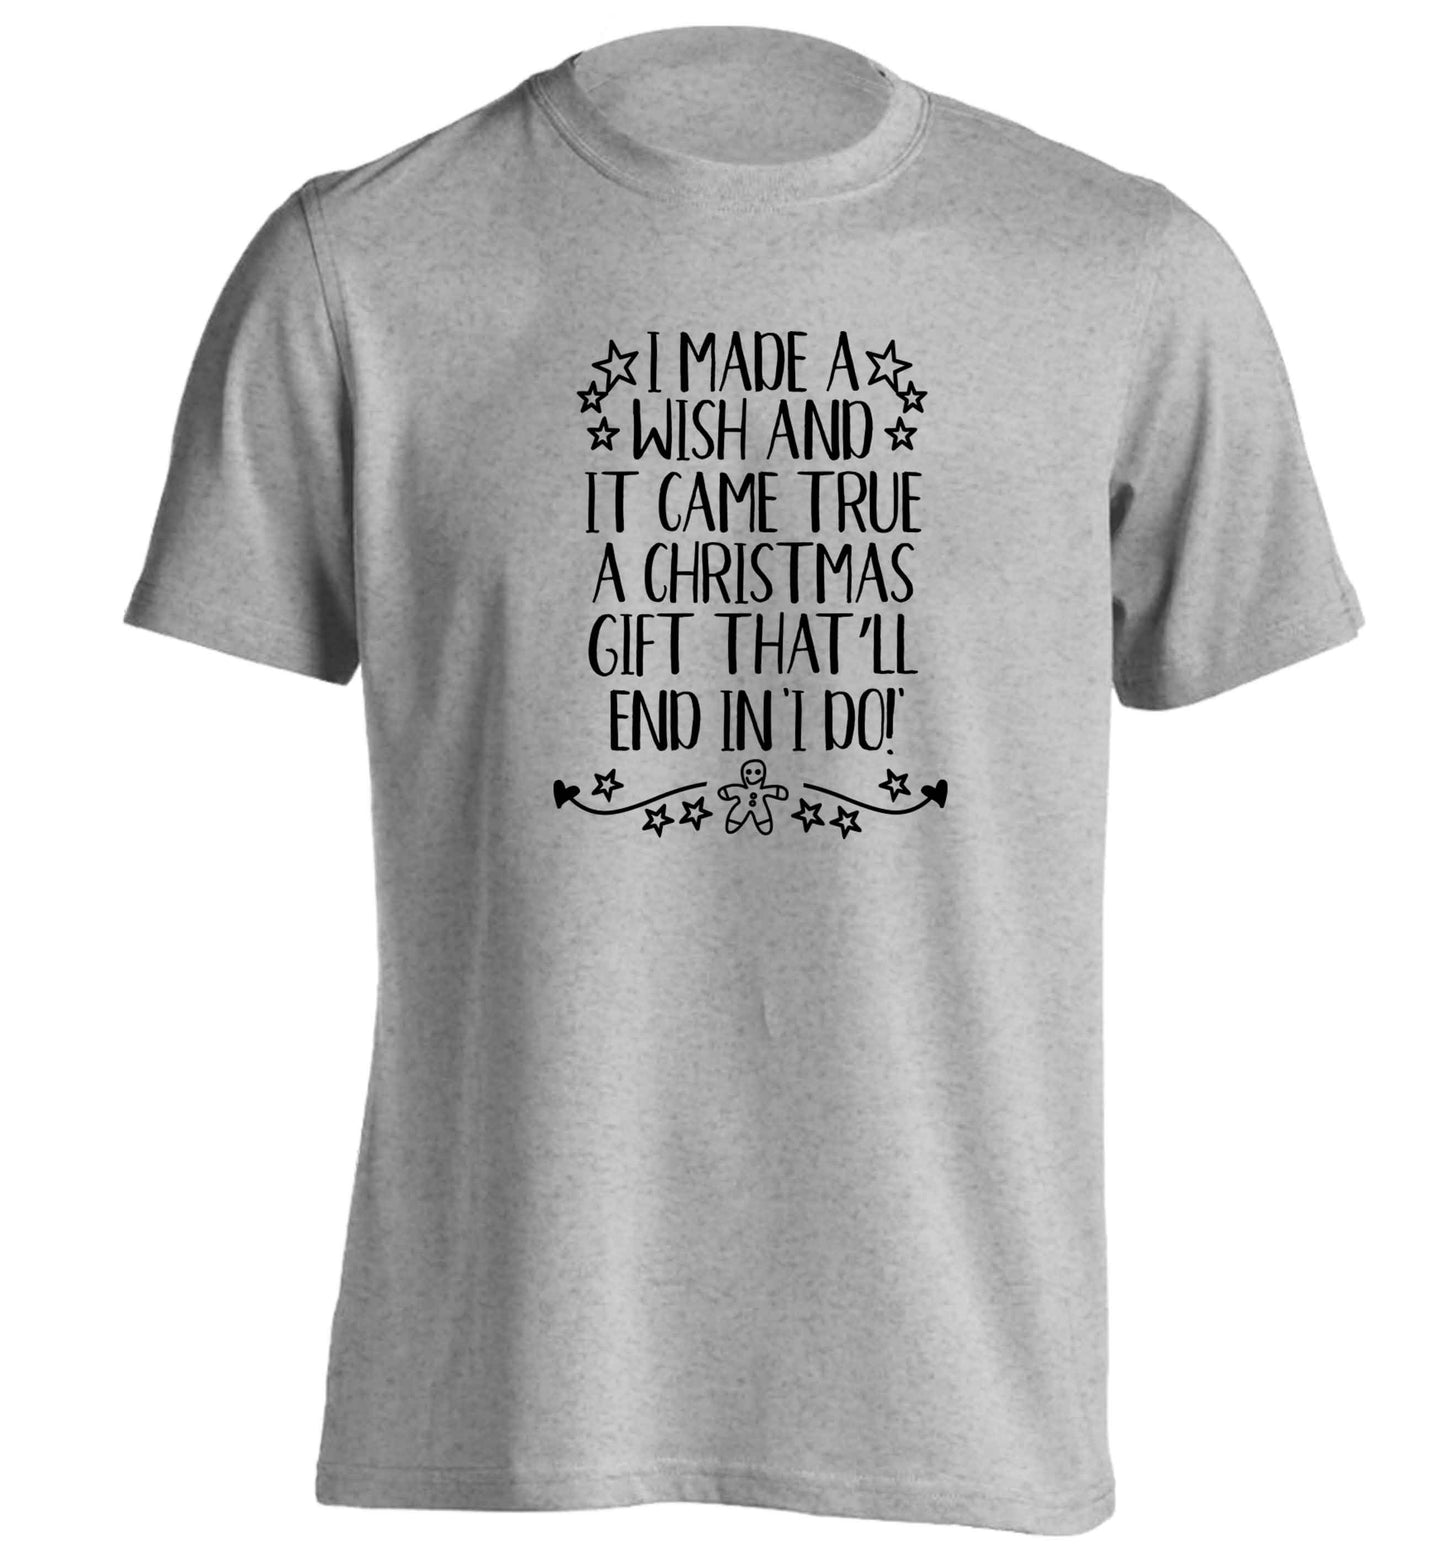 I made a wish and it came true a Christmas gift that'll end in 'I do' adults unisex grey Tshirt 2XL